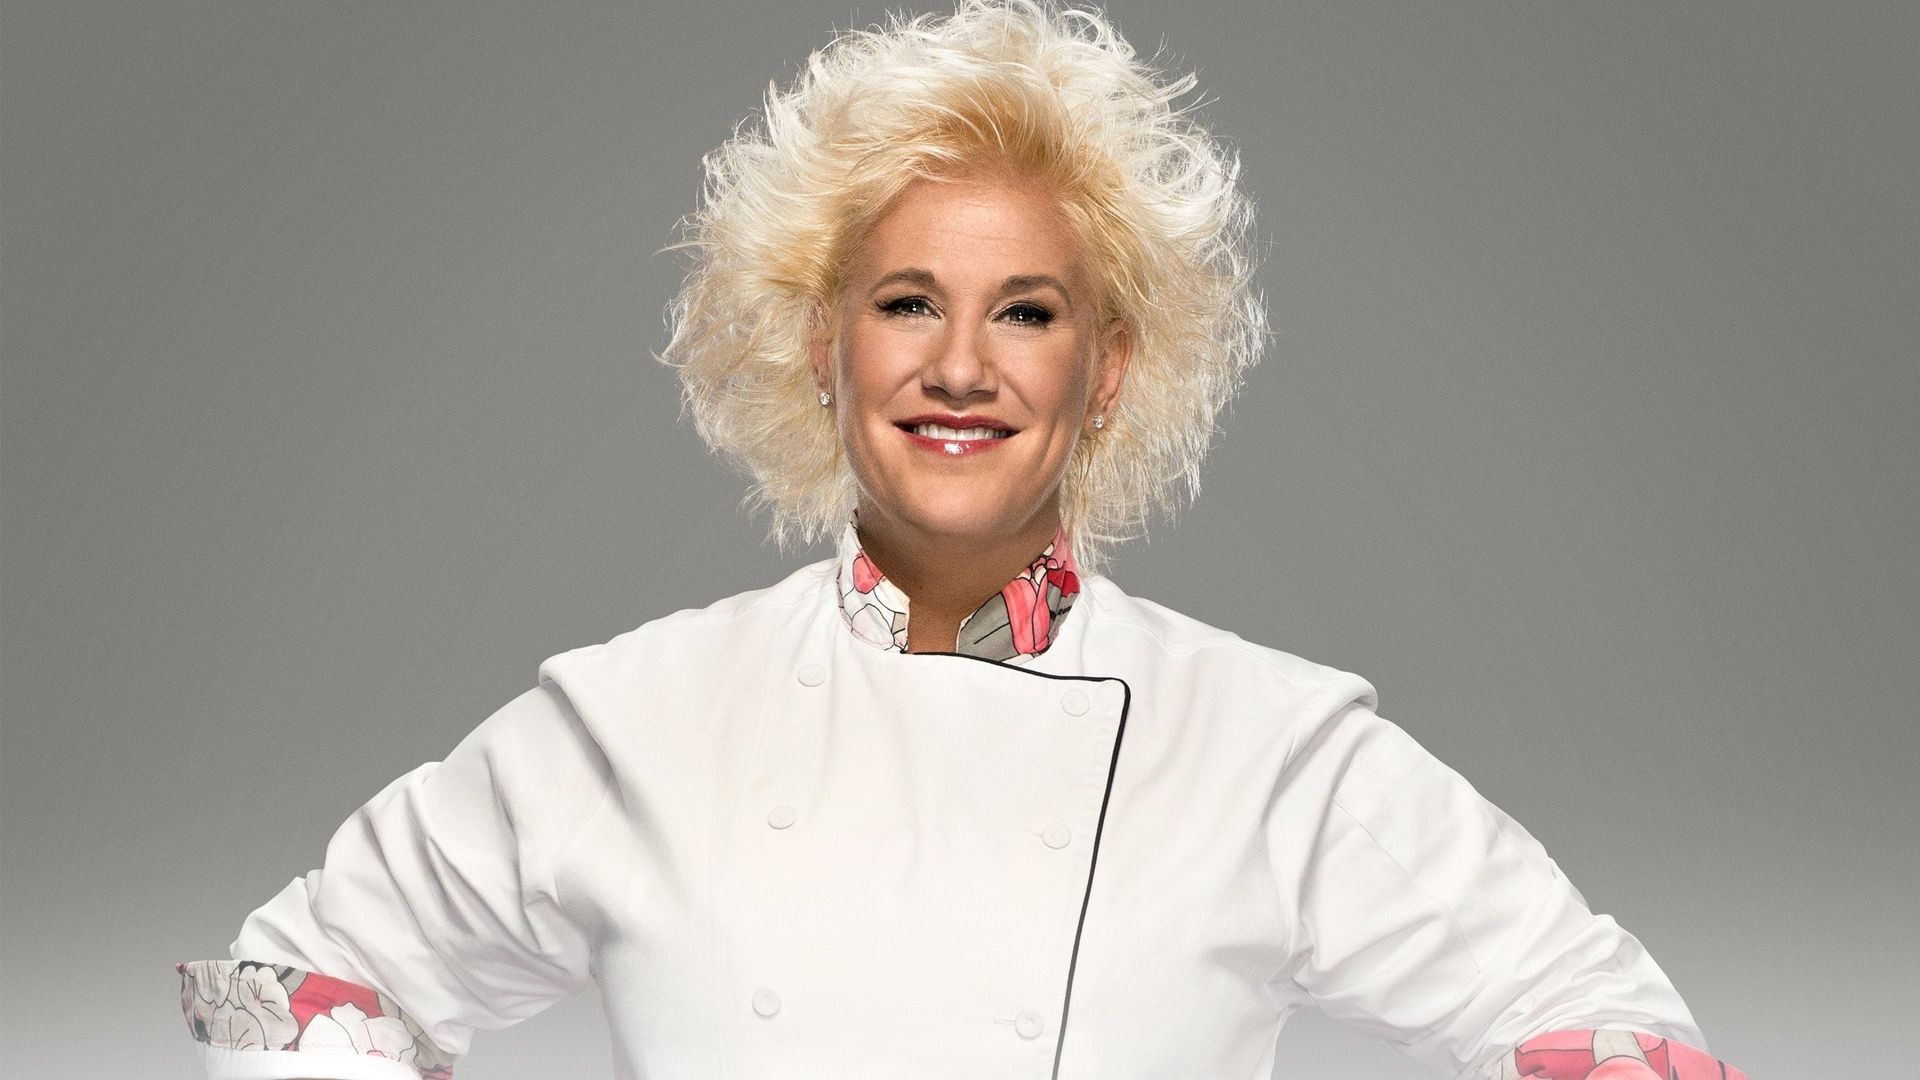 Chef Wanted with Anne Burrell background